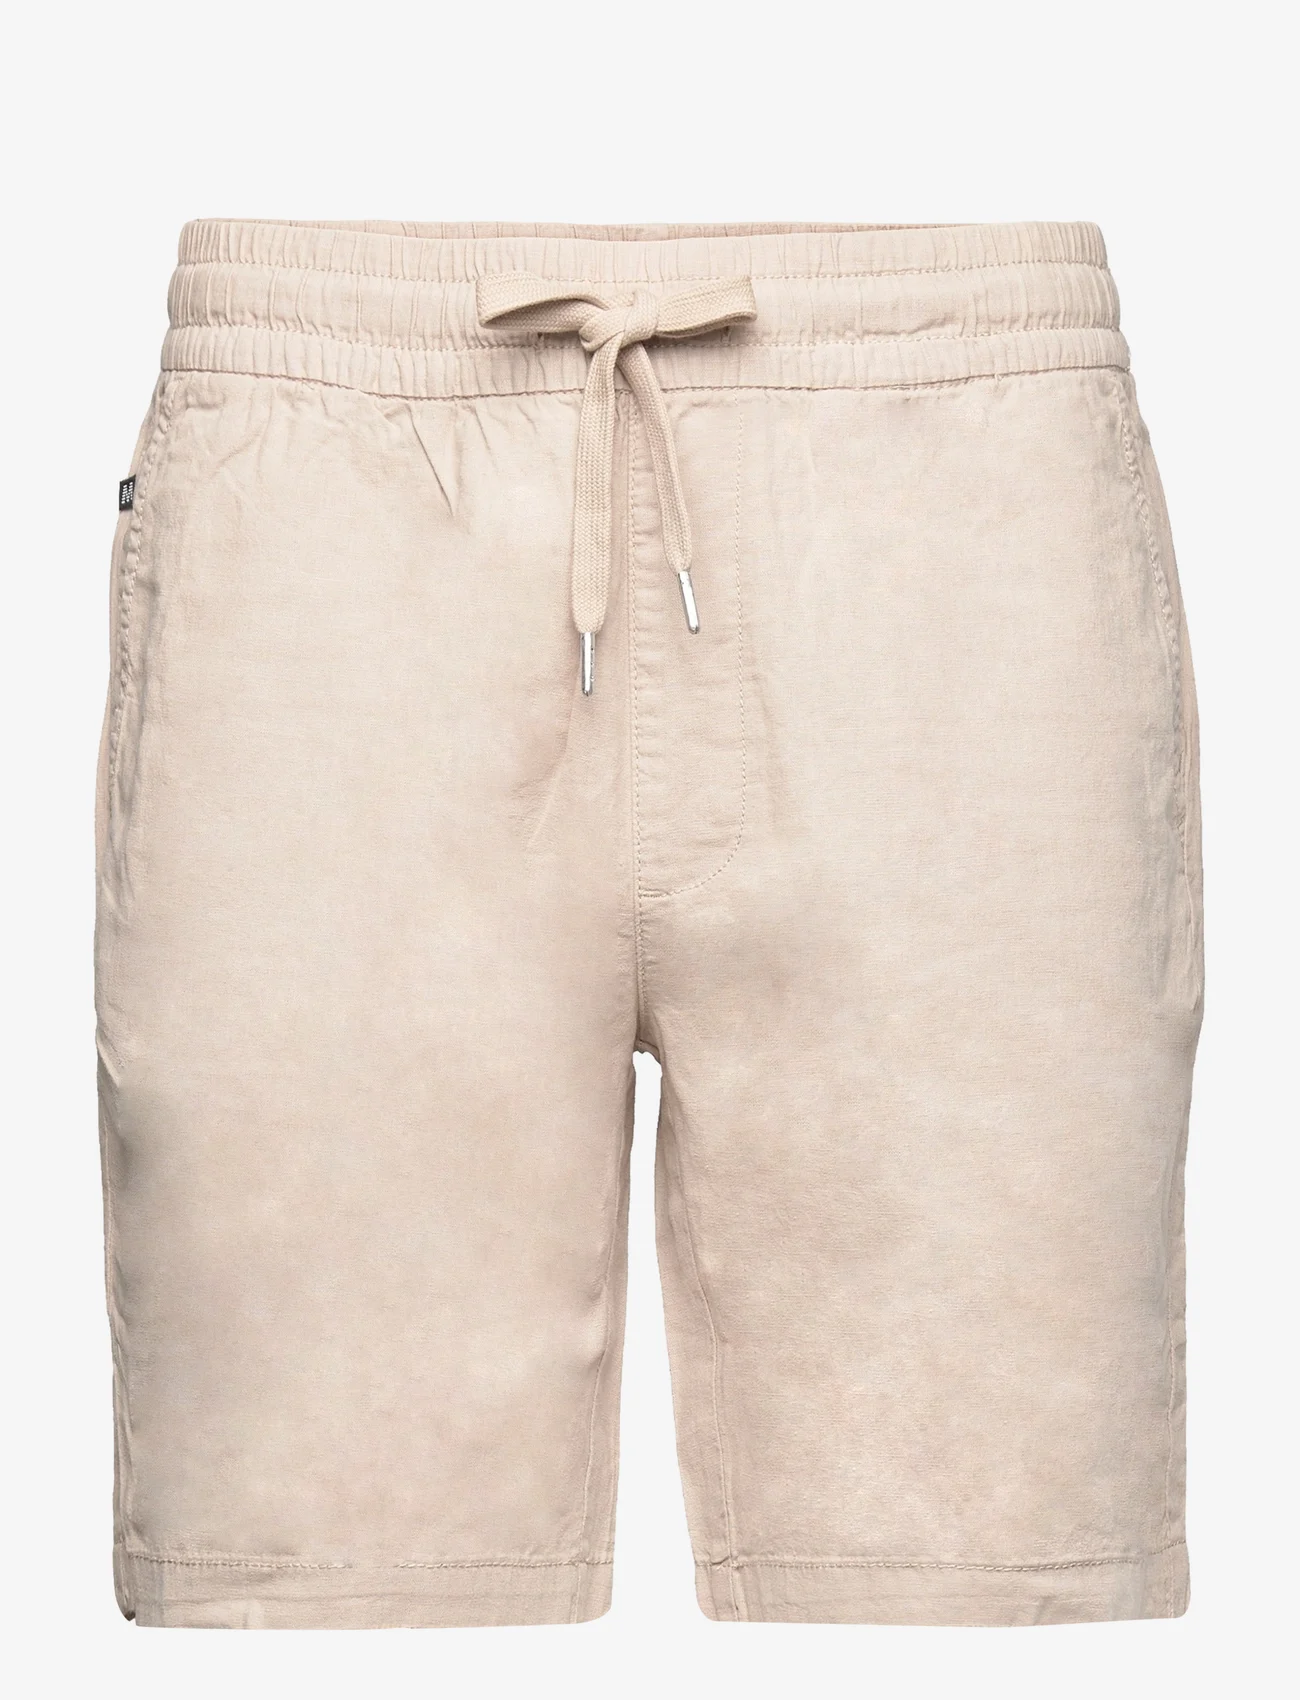 Matinique - MAbarton Short - linnen shorts - simply taupe - 0